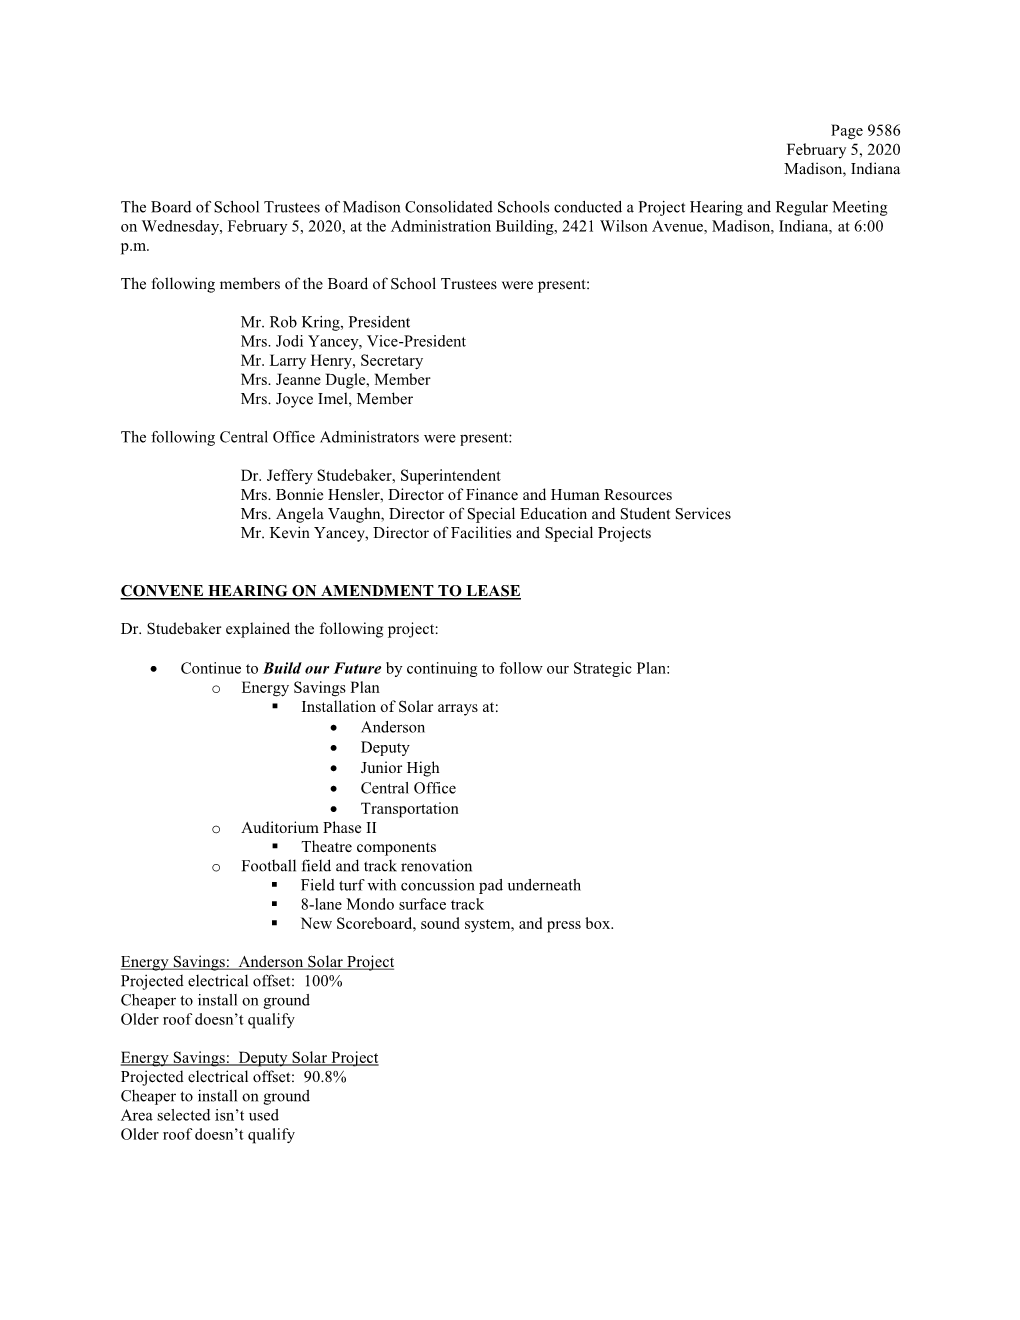 Page 9586 February 5, 2020 Madison, Indiana the Board of School Trustees of Madison Consolidated Schools Conducted a Project